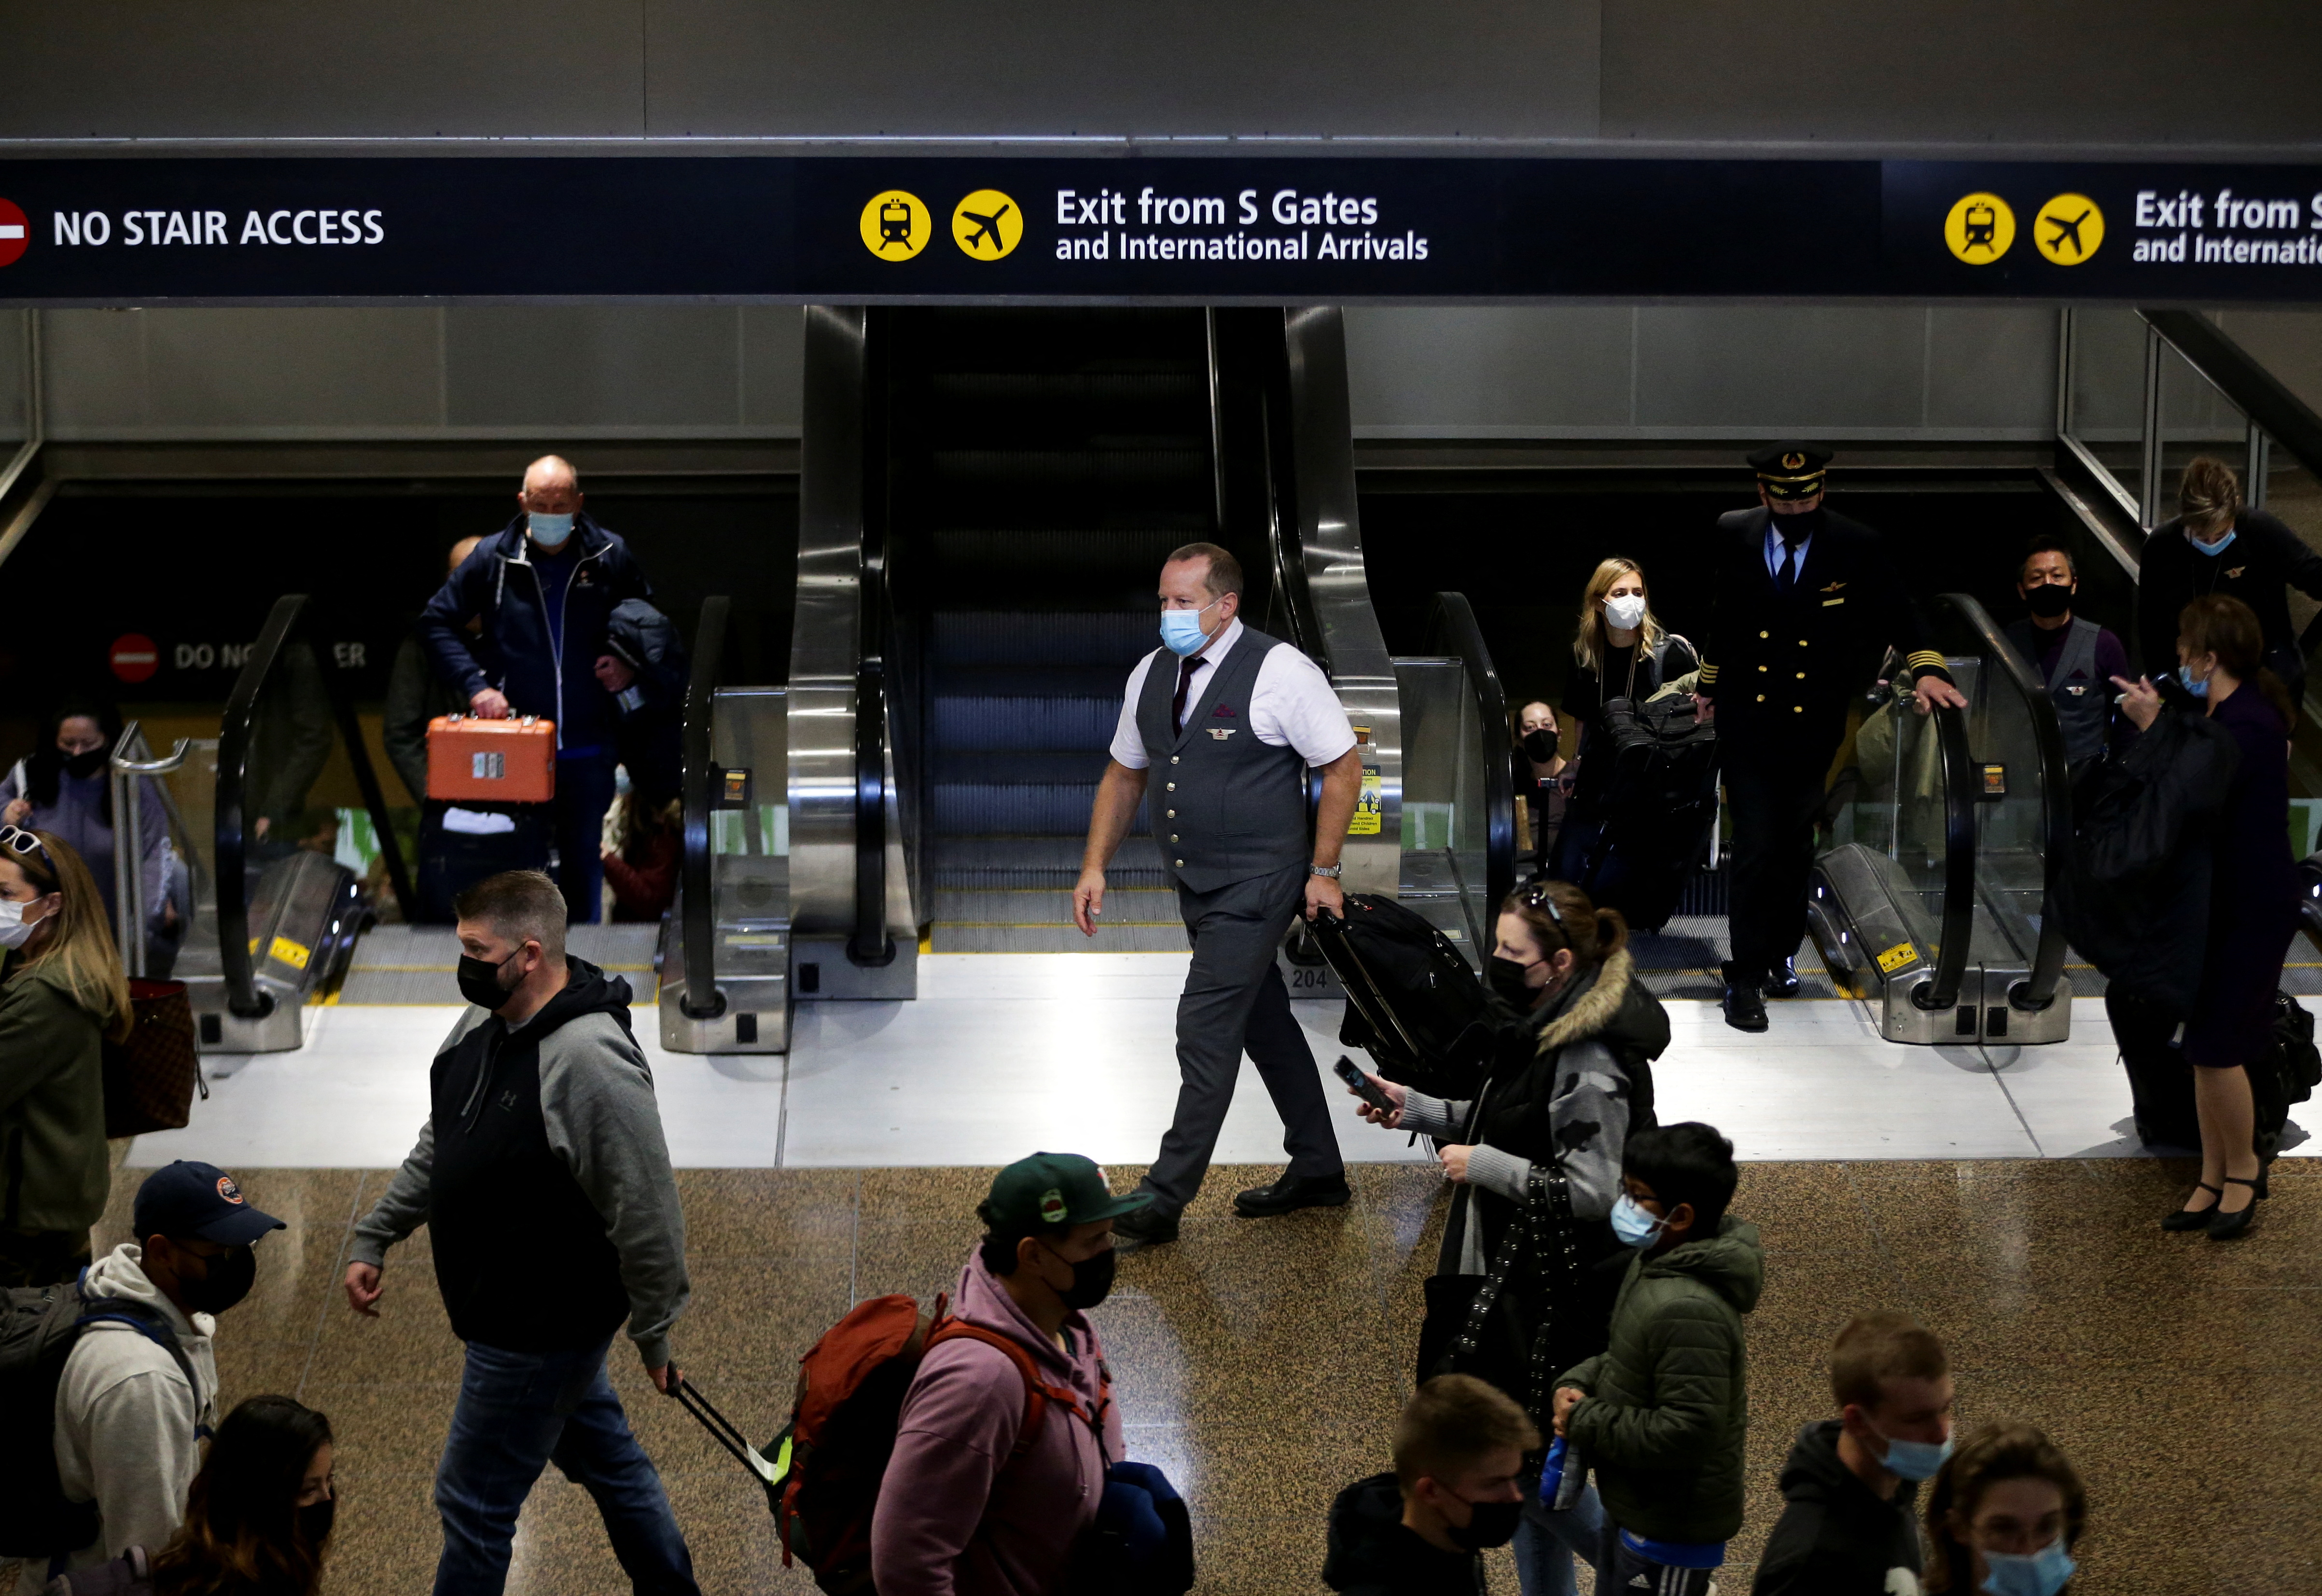 People enter the baggage claim area from the international arrivals terminal as the U.S. reopens air and land borders to coronavirus disease (COVID-19) vaccinated travellers for the first time since the COVID-19 restrictions were imposed, at Sea-Tac Airport in Seattle, Washington, U.S. November 8, 2021.  REUTERS/Lindsey Wasson